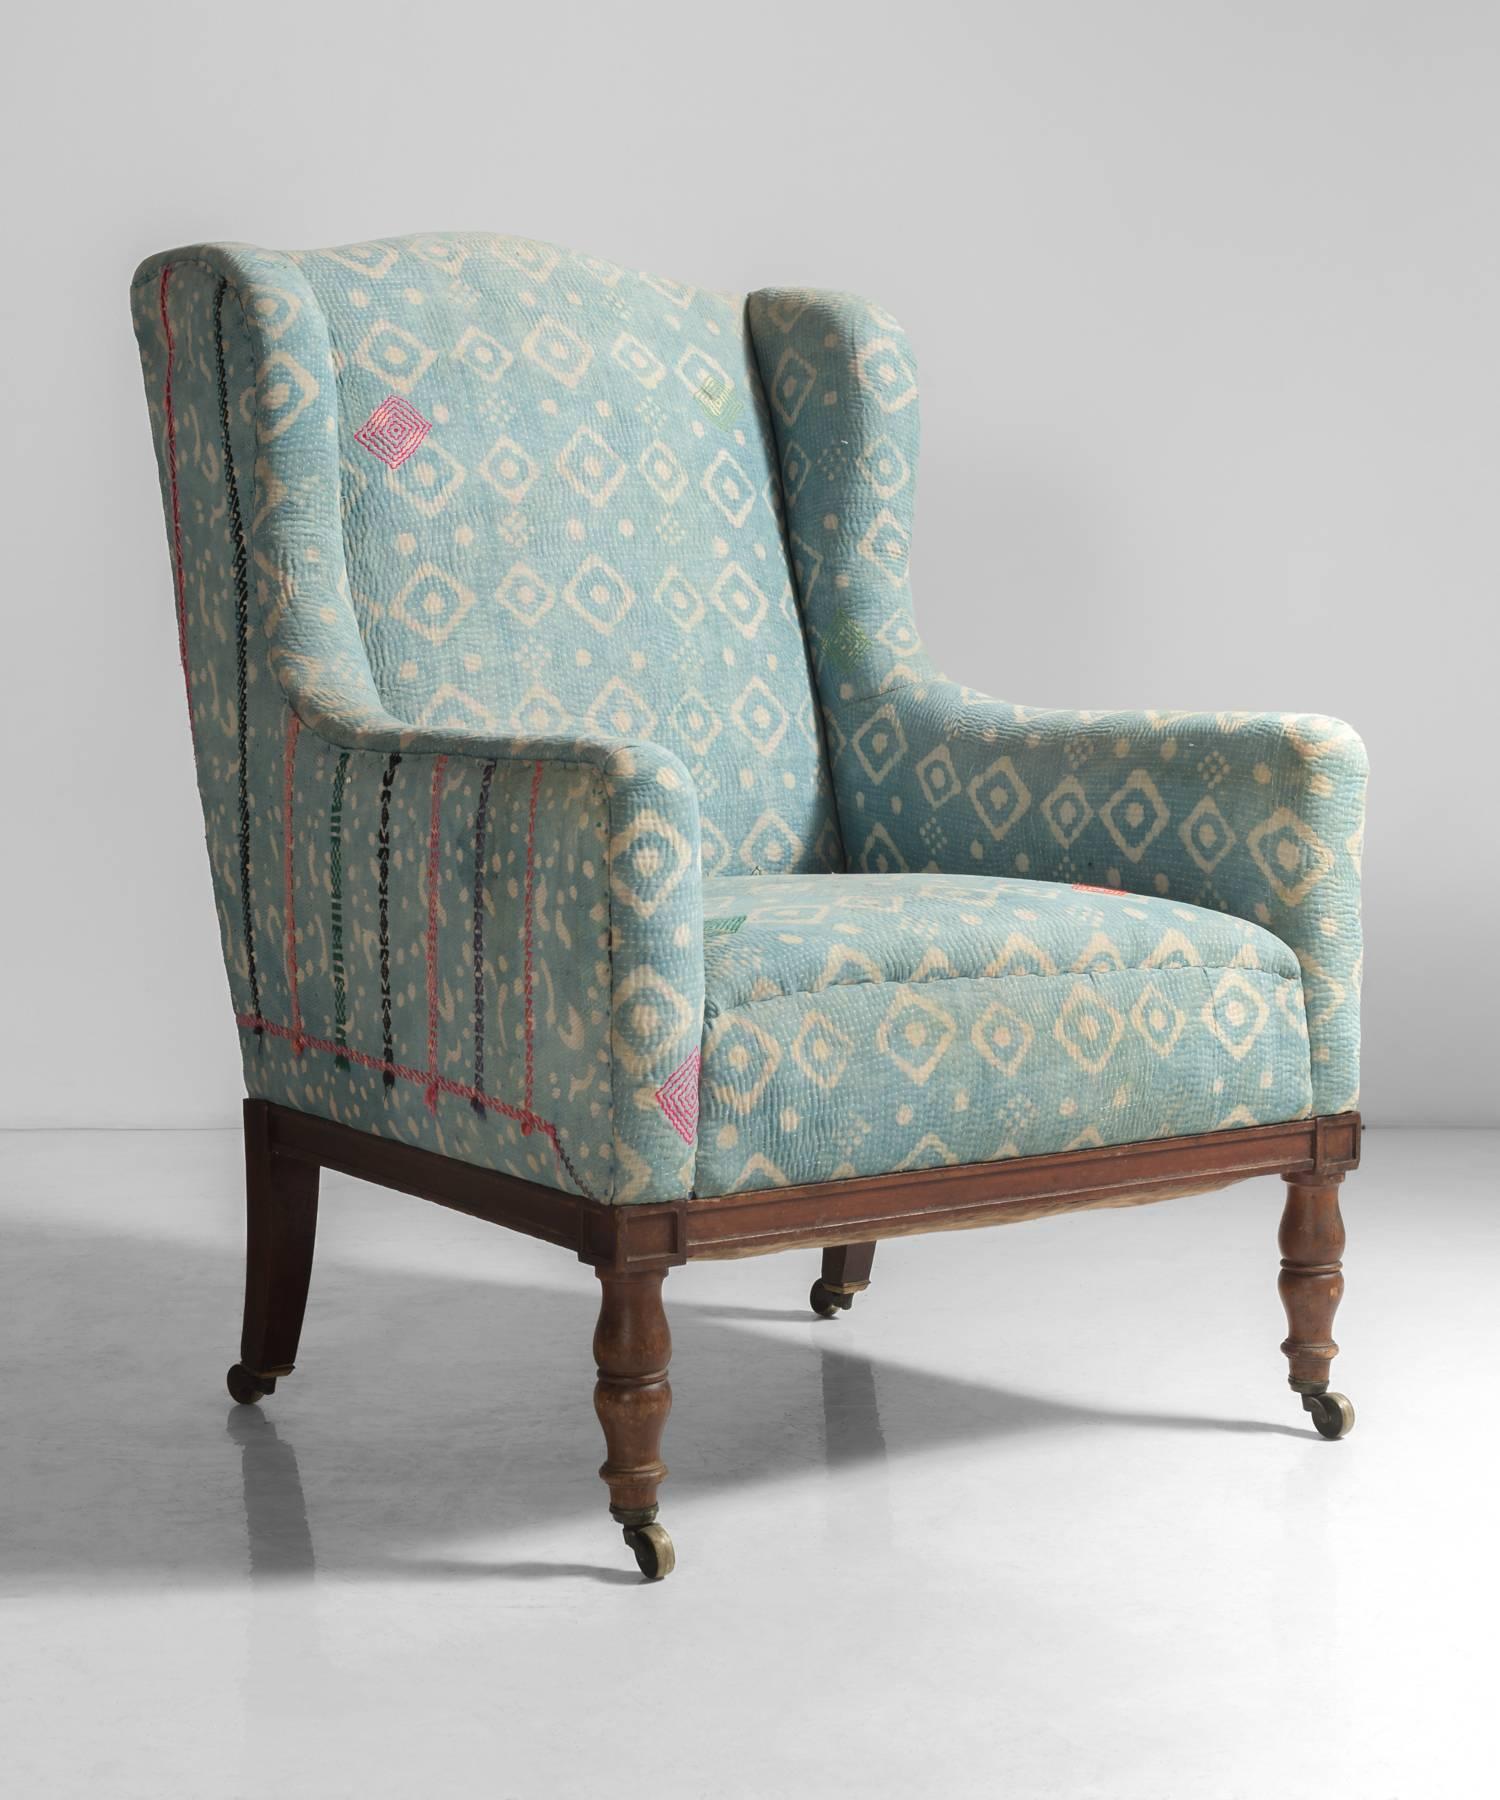 Indian Quilt Walnut Wingchair, England, circa 1880.

Reupholstered in vintage Indian quilts. Walnut frame, with handsome turned legs on original castors.